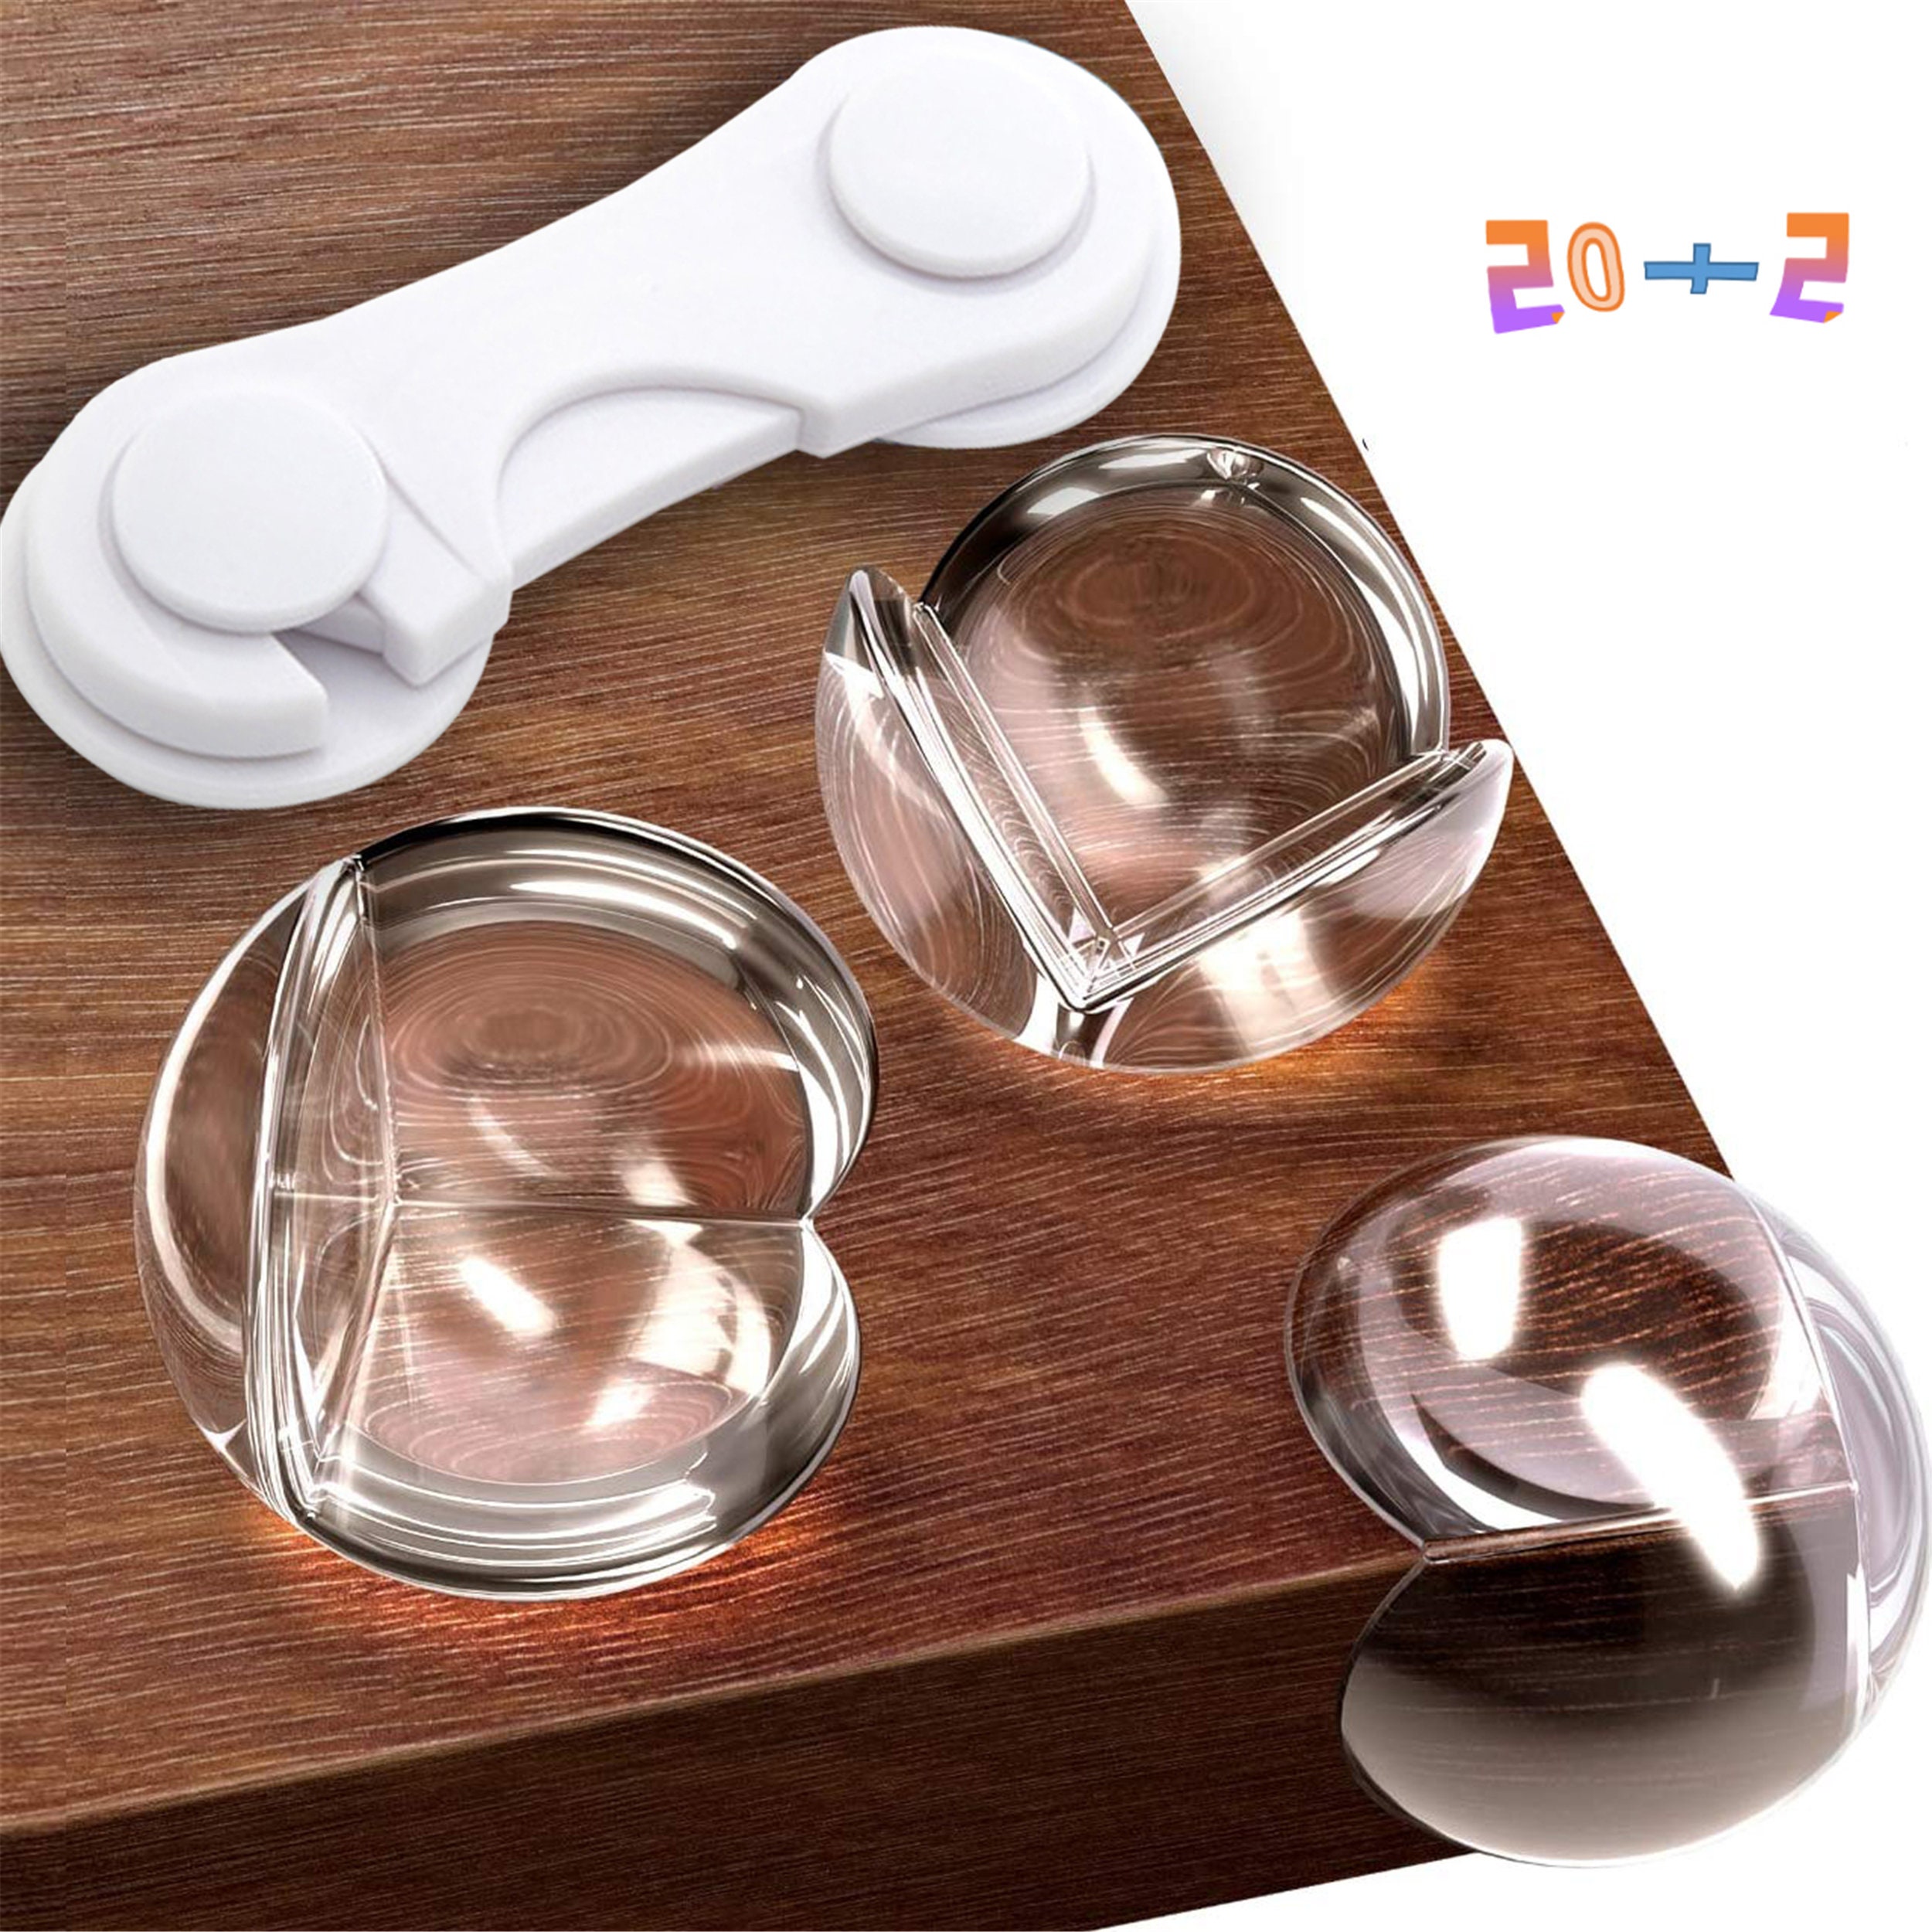 Baby Products Online - Baby Proof Corner Protector